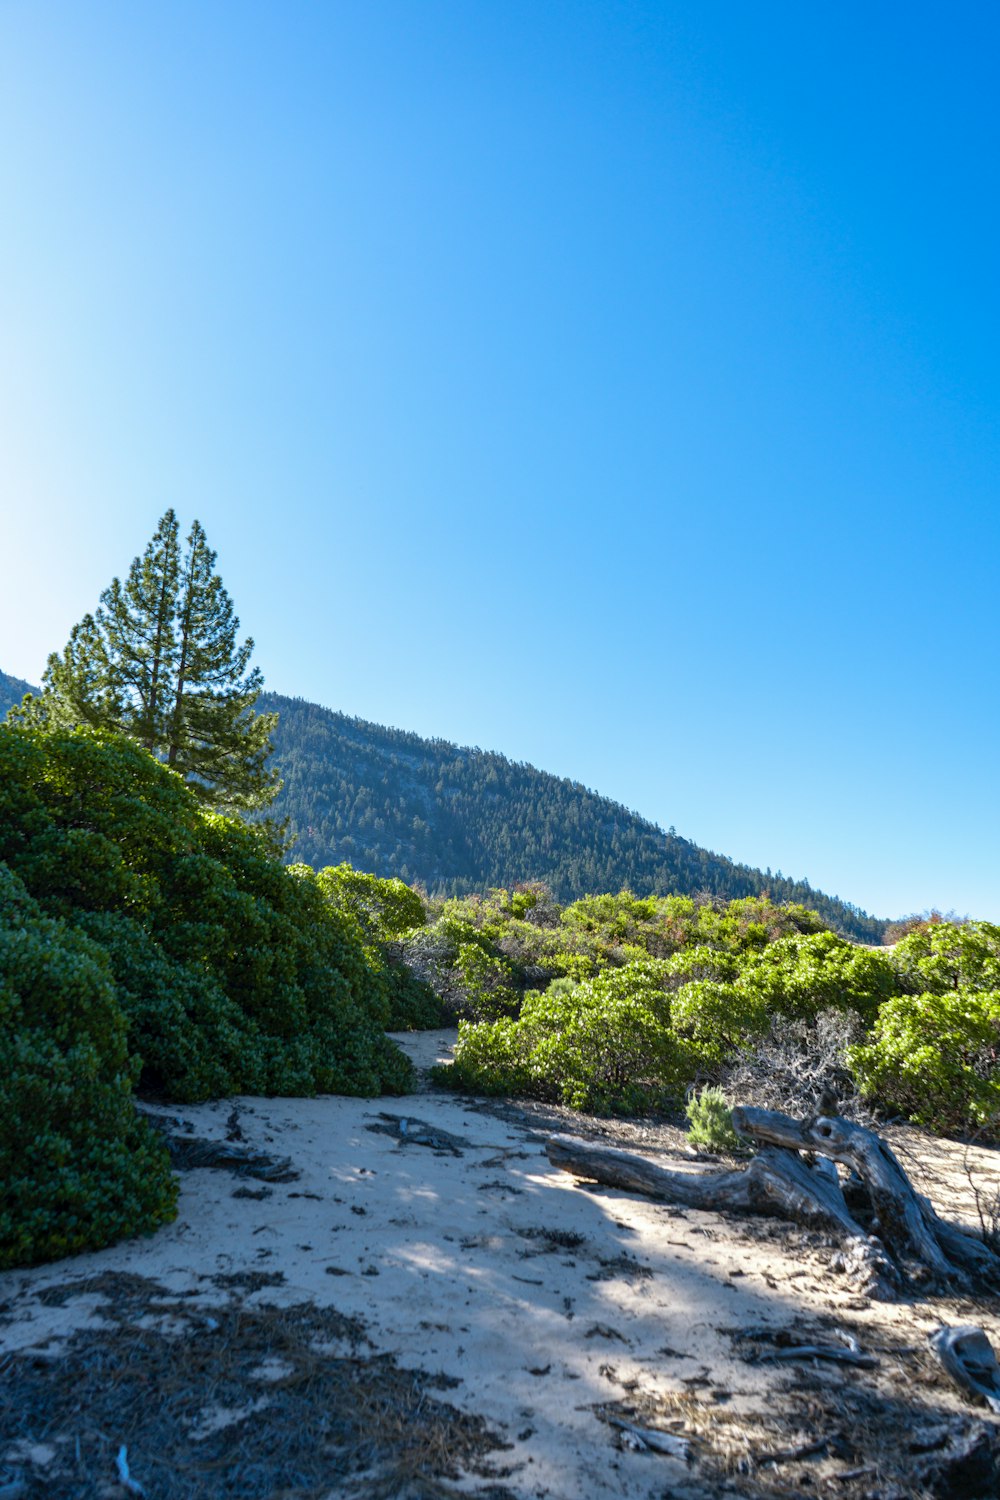 a view of a mountain with trees and rocks